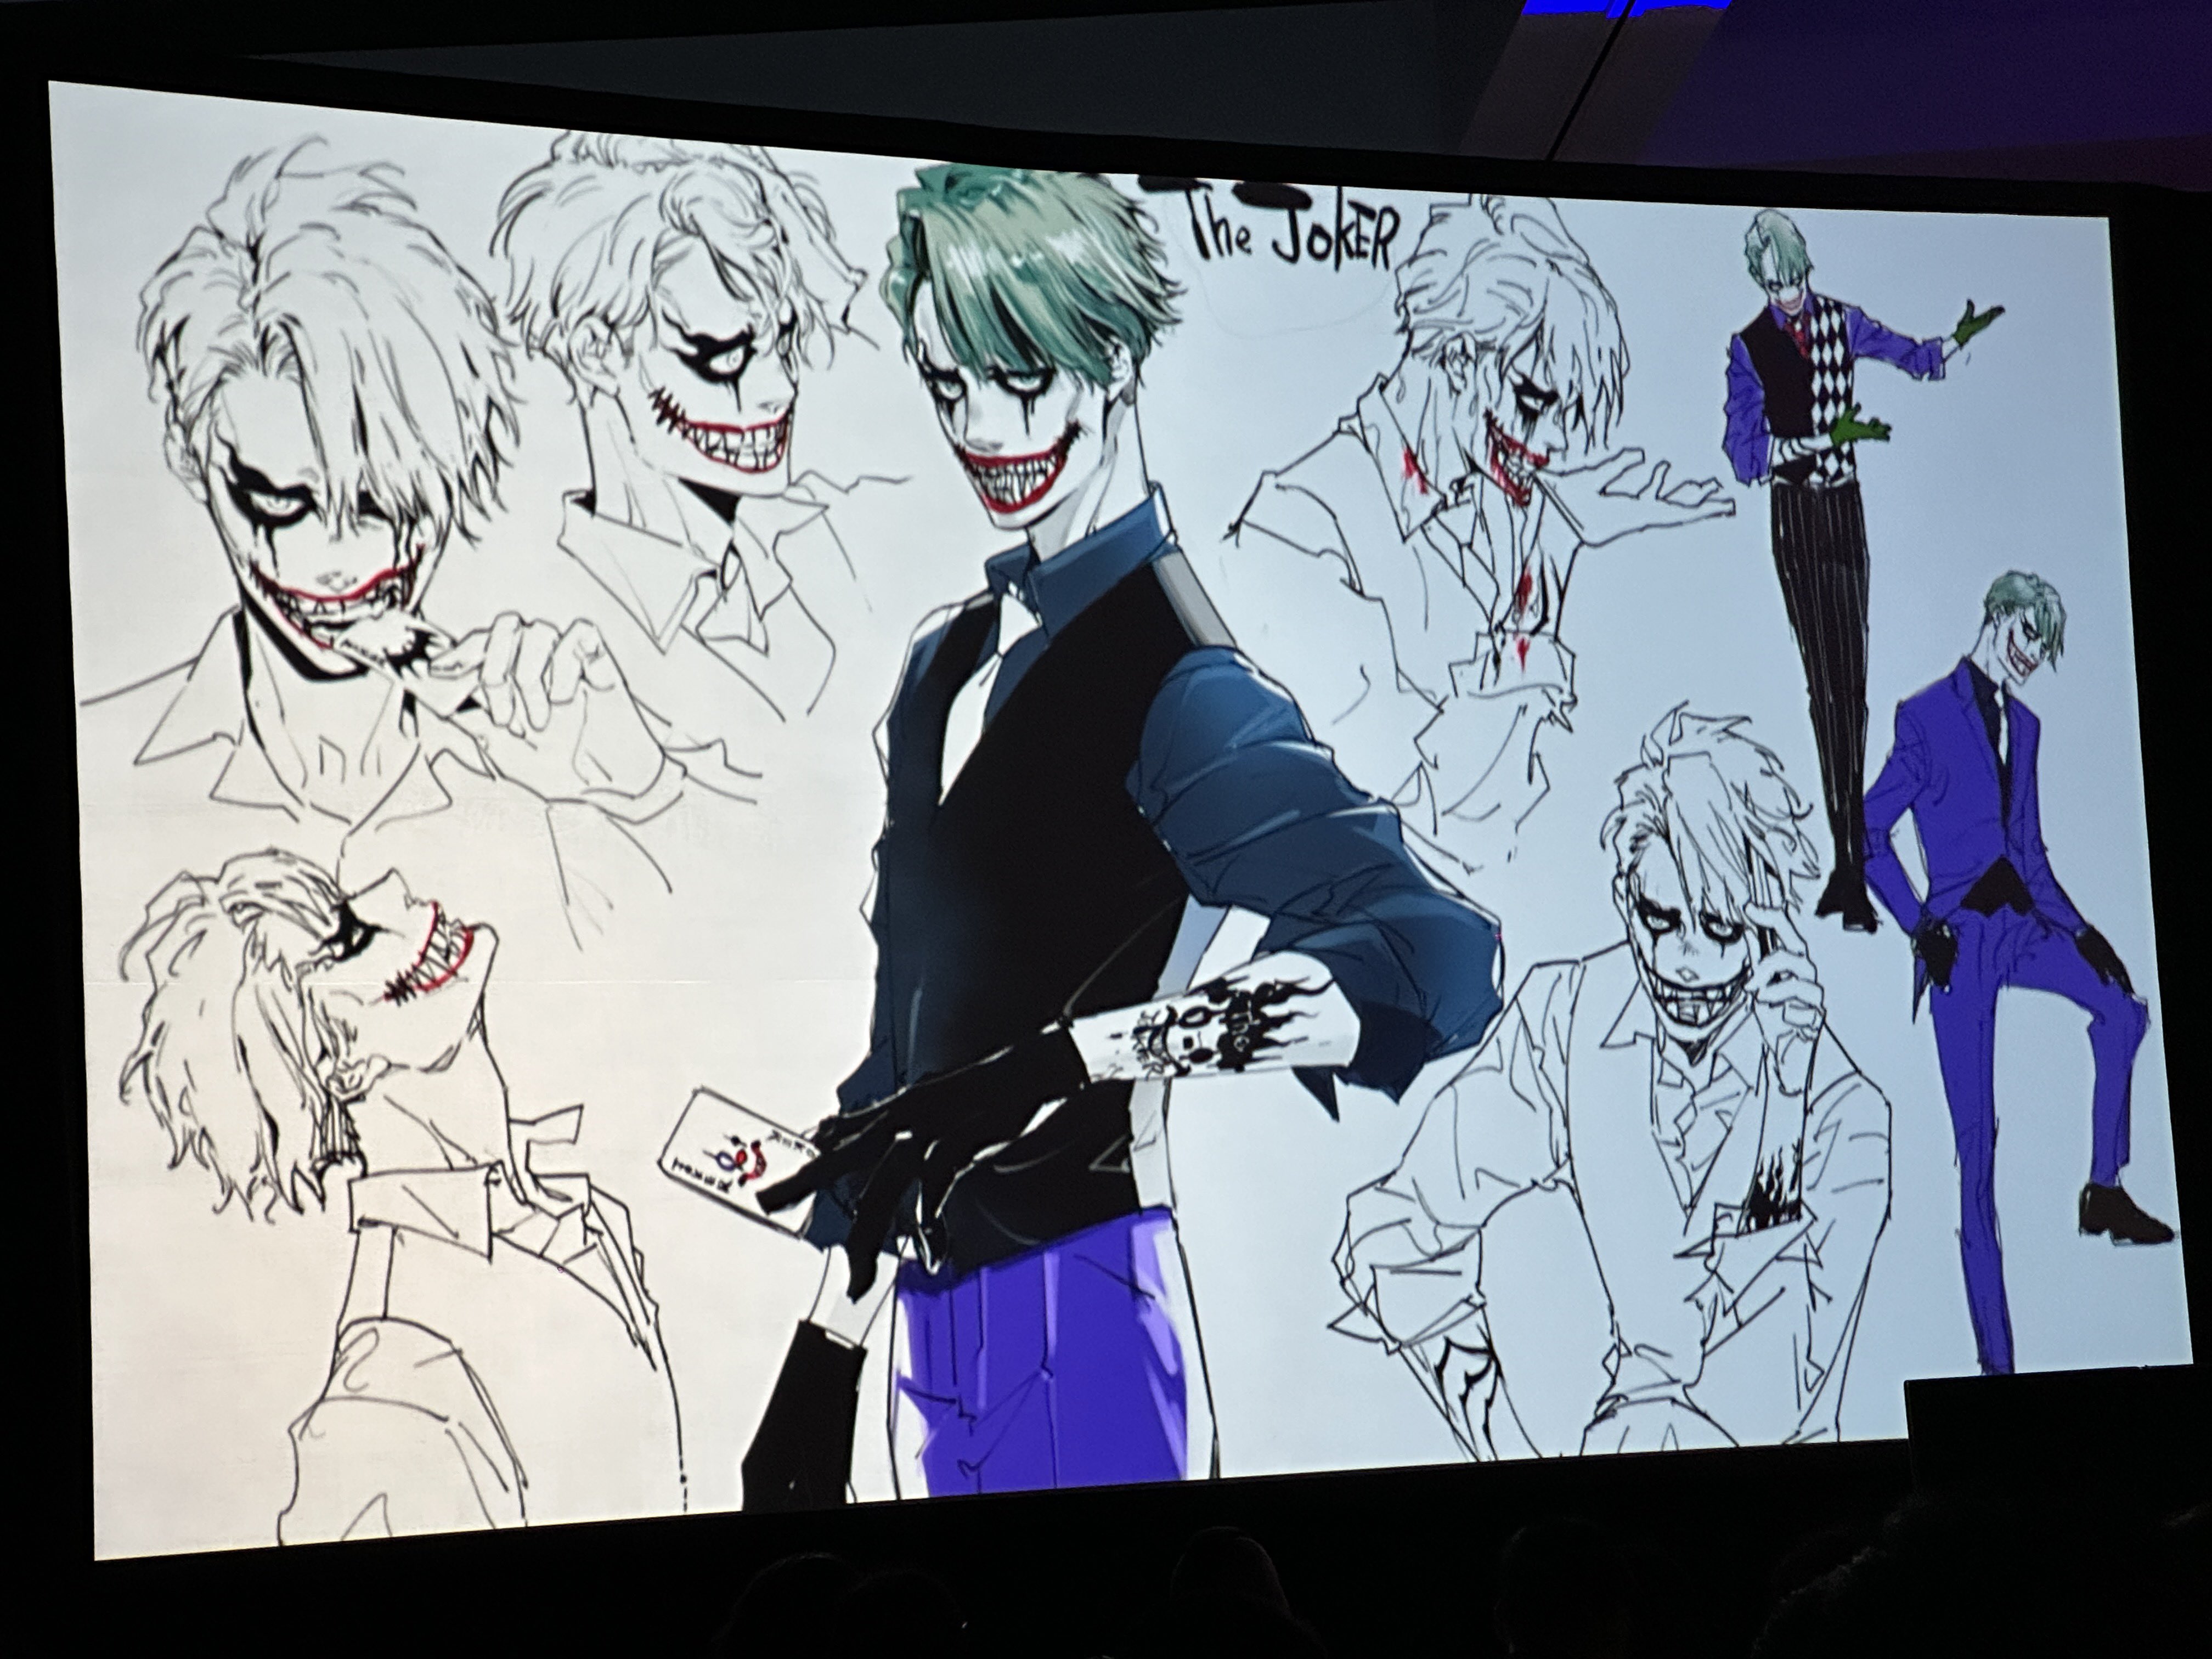 WIT Studio is Working on a New Isekai Suicide Squad Anime Series